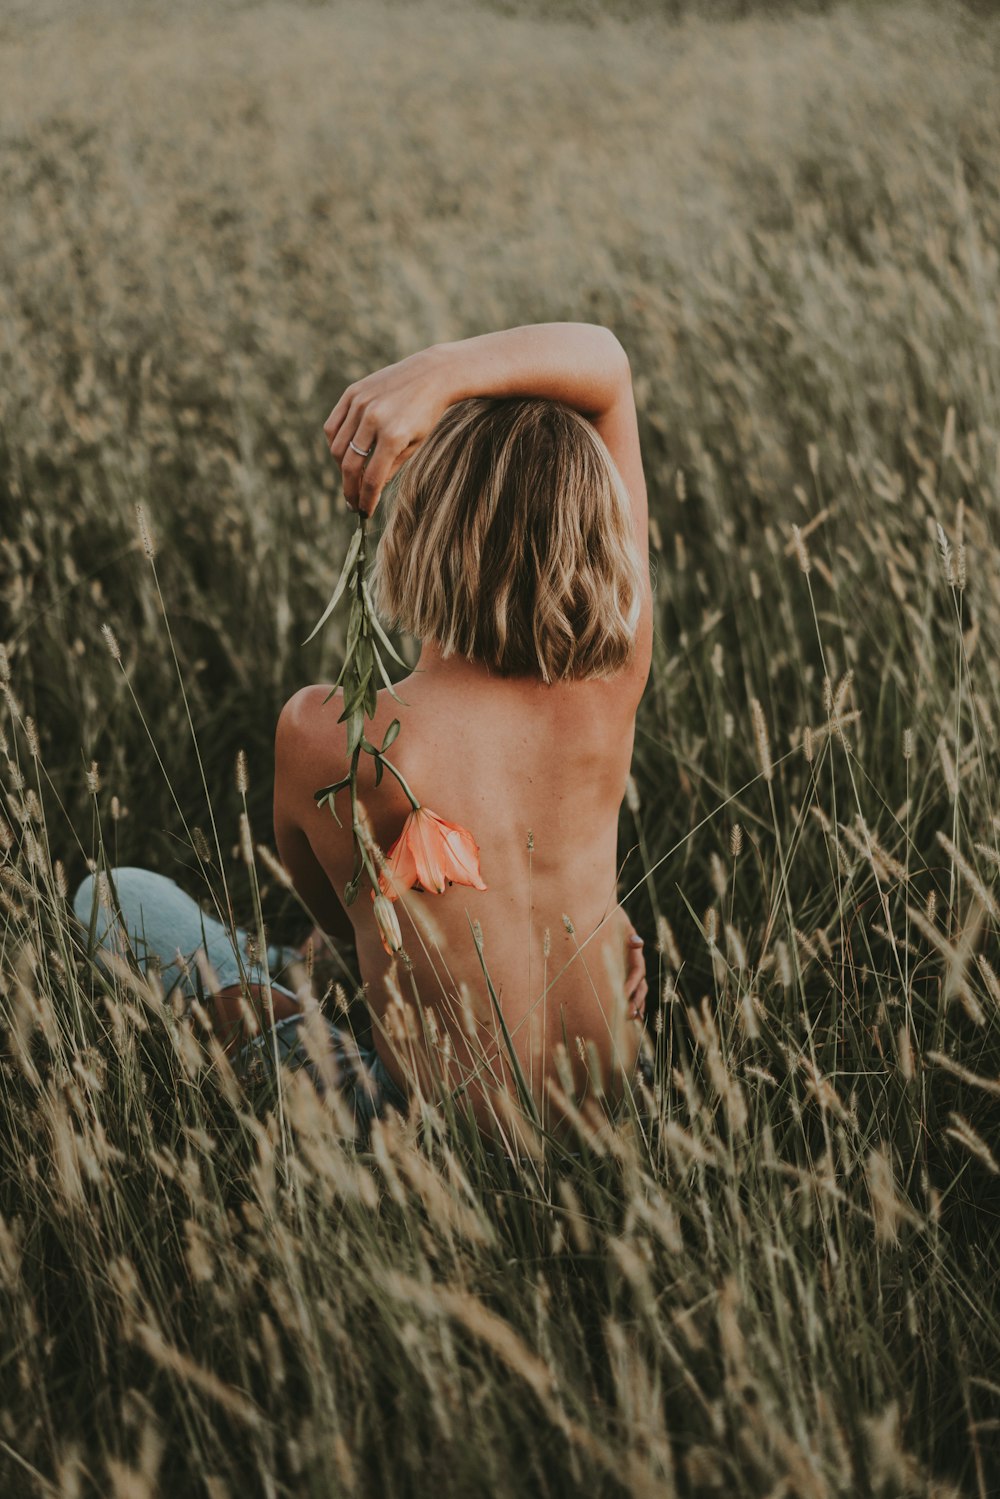 a naked boy sitting in a field of tall grass